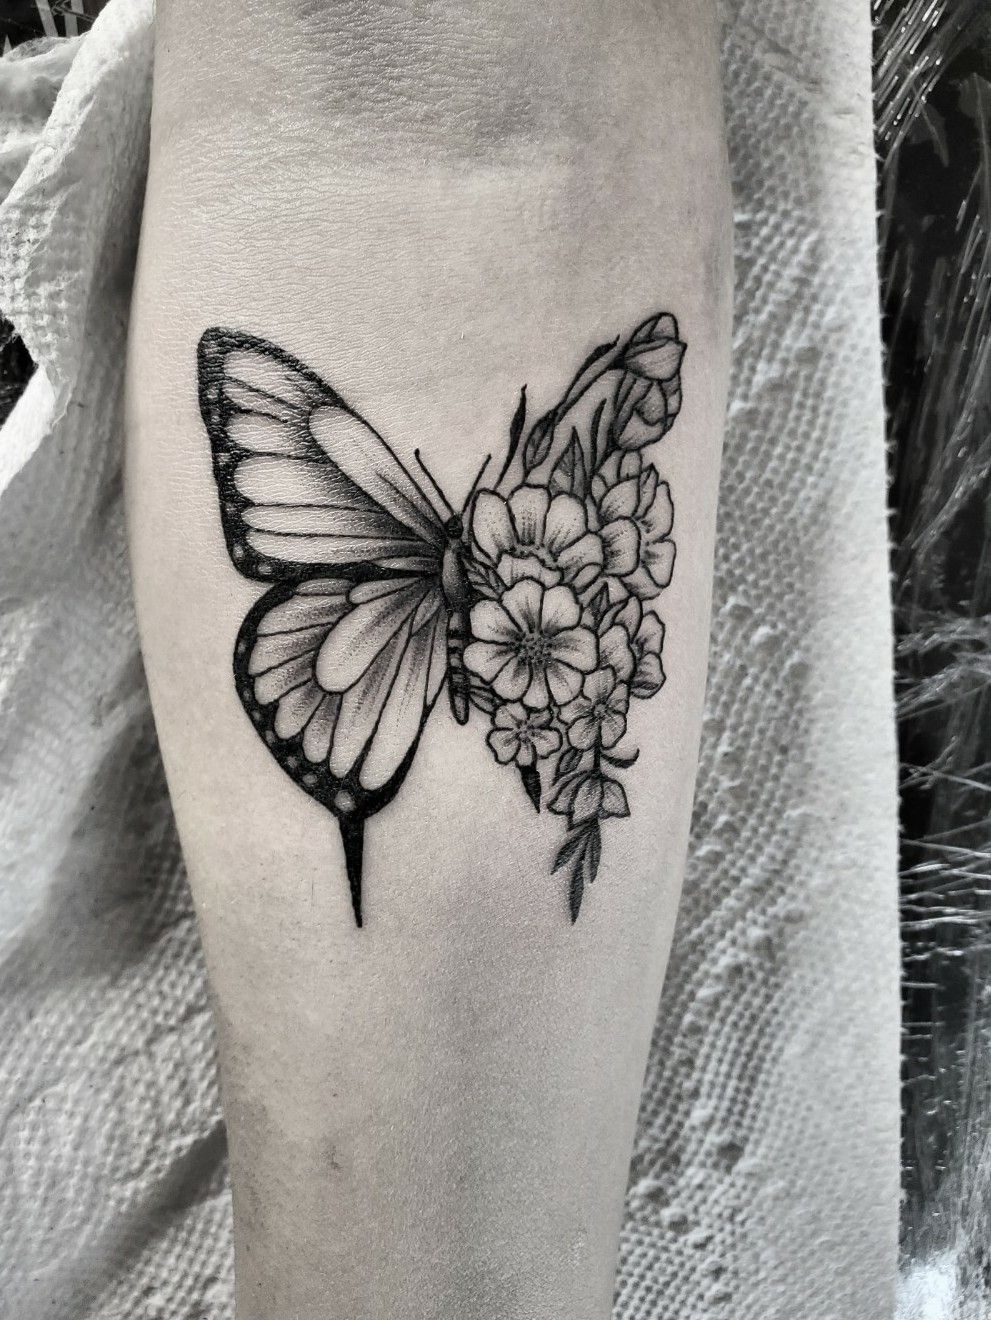 10 Best Black Butterfly Tattoo Ideas Youll Have To See To Believe    Daily Hind News